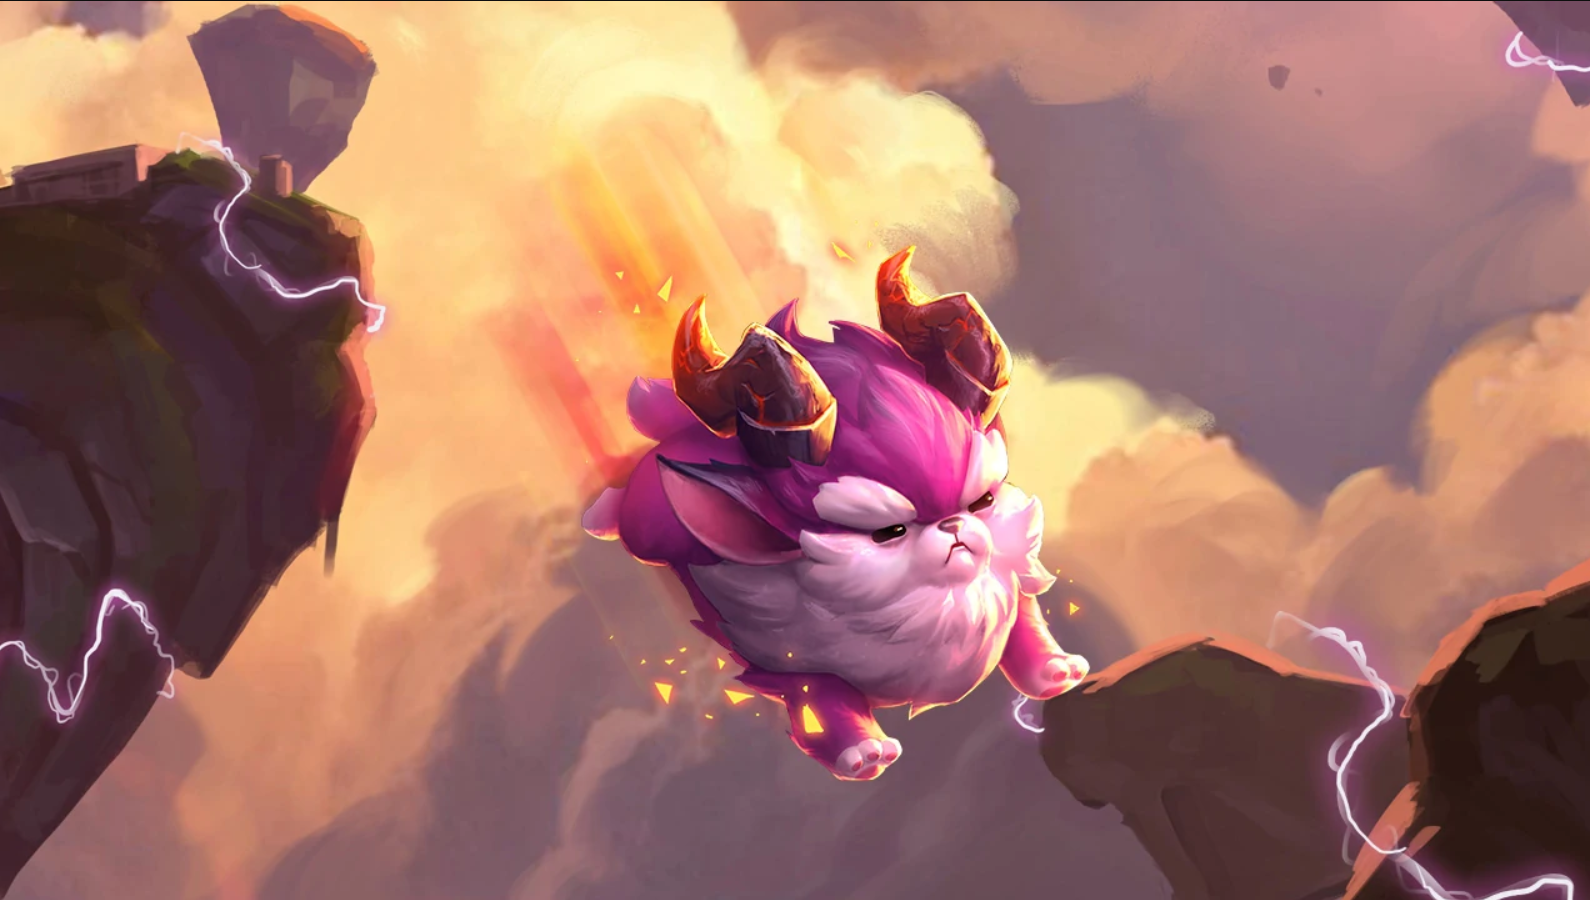 Teamfight Tactics Meta: Best Comps and Builds for TFT Set 7.5 (Patch 12.20)